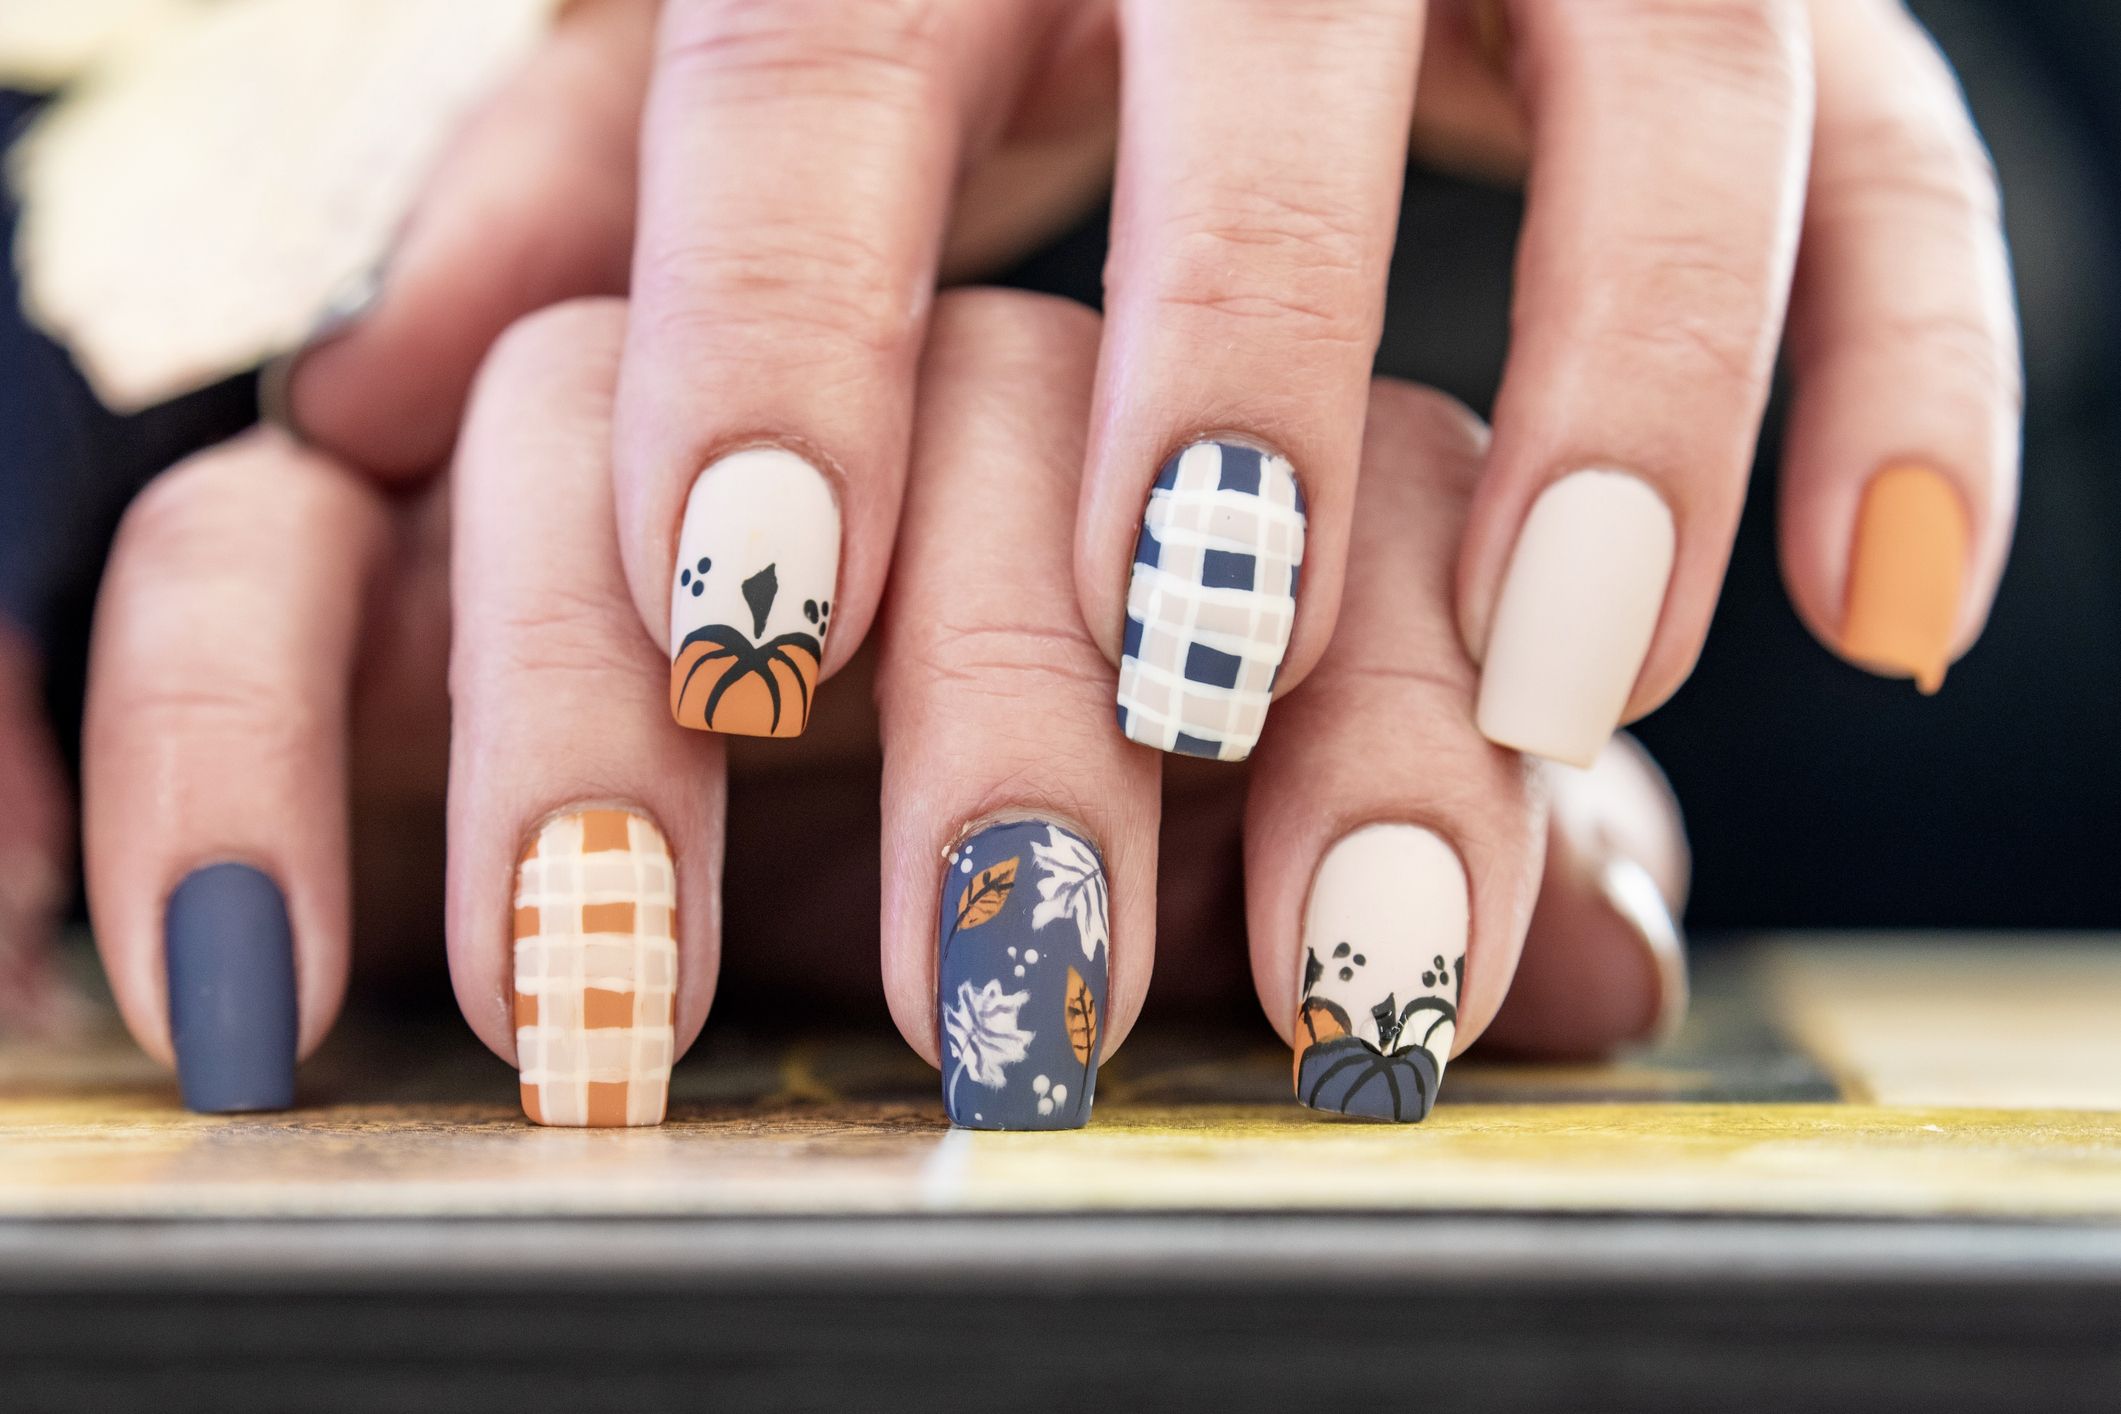 Astrology Nails Are Everywhere on Instagram Right Now - (Page 2)